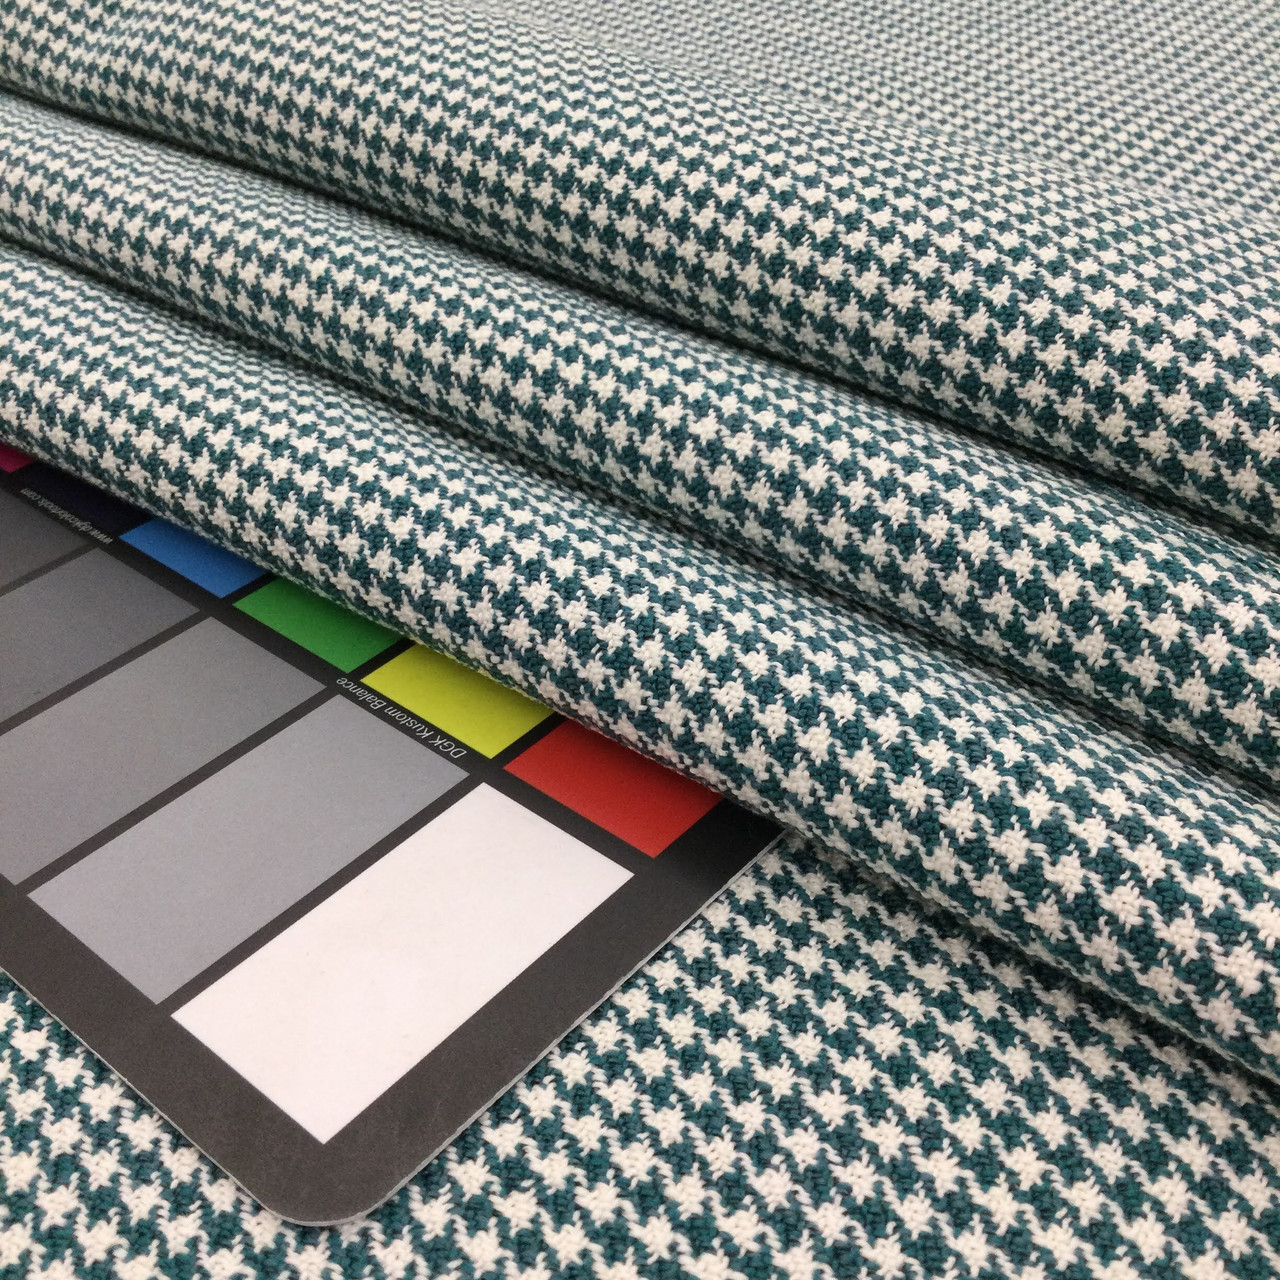 Houndstooth Fabric in Teal and White, Upholstery